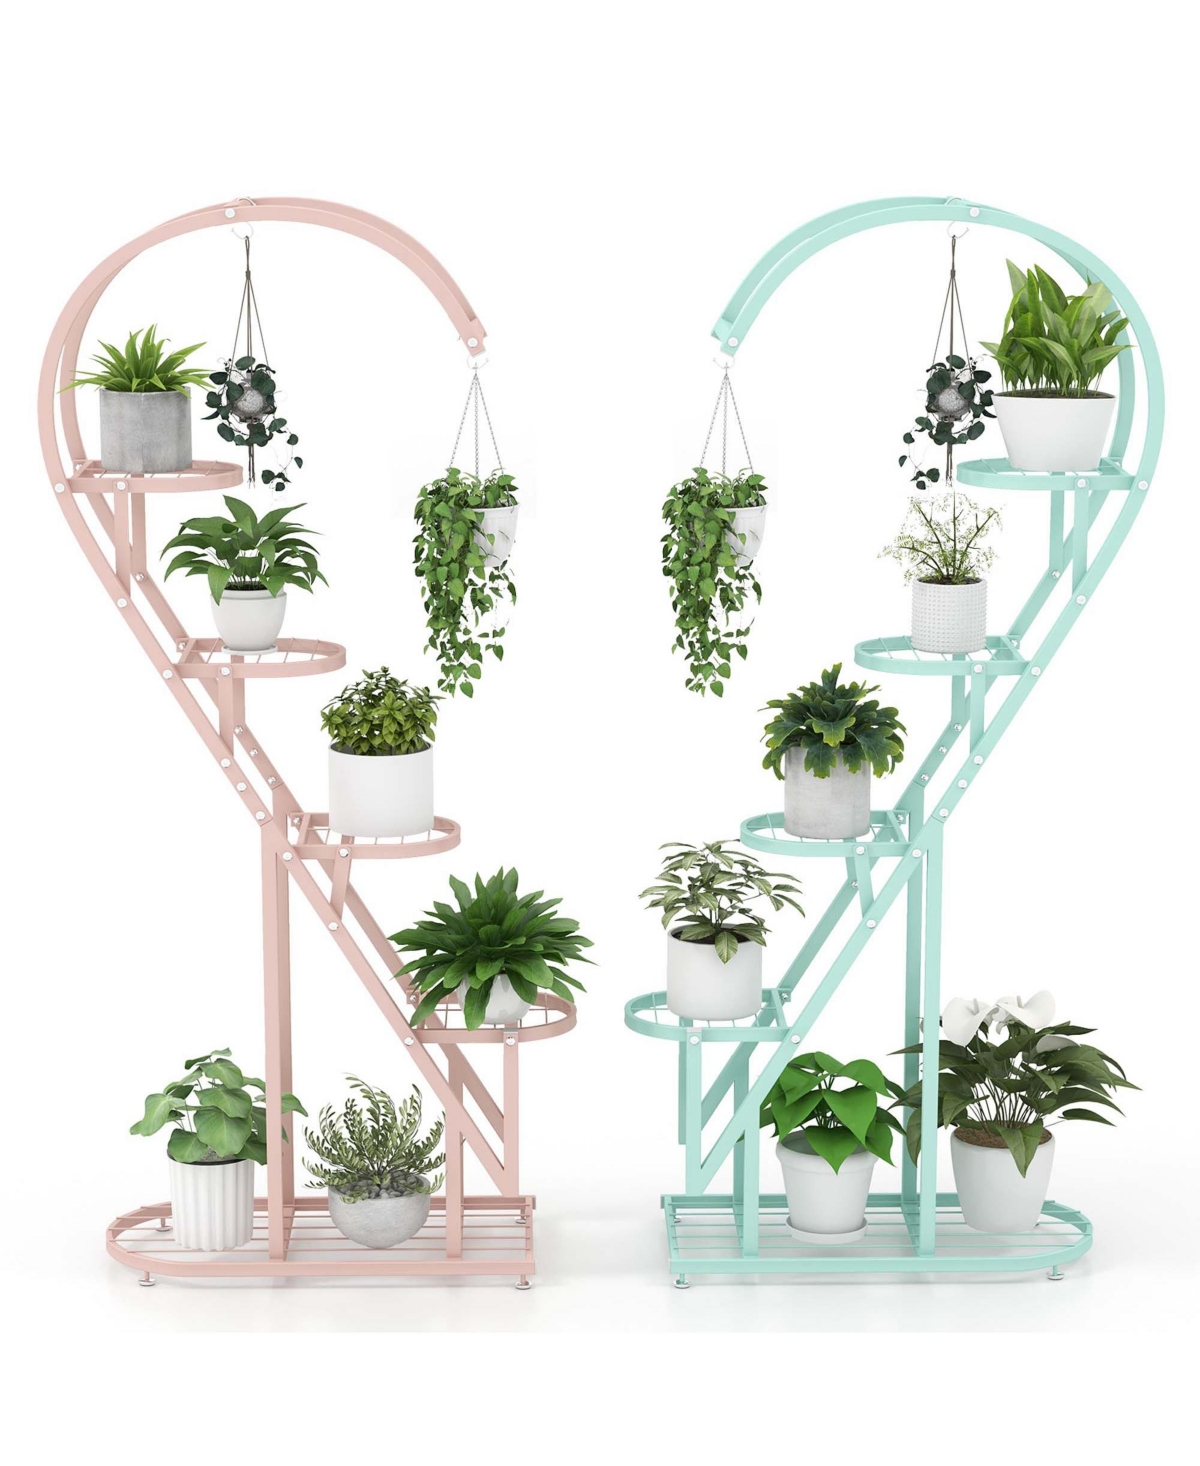 5 Tier Metal Plant Stand Heart-shaped Shelf with Hanging Hook for Multiple Plants - White